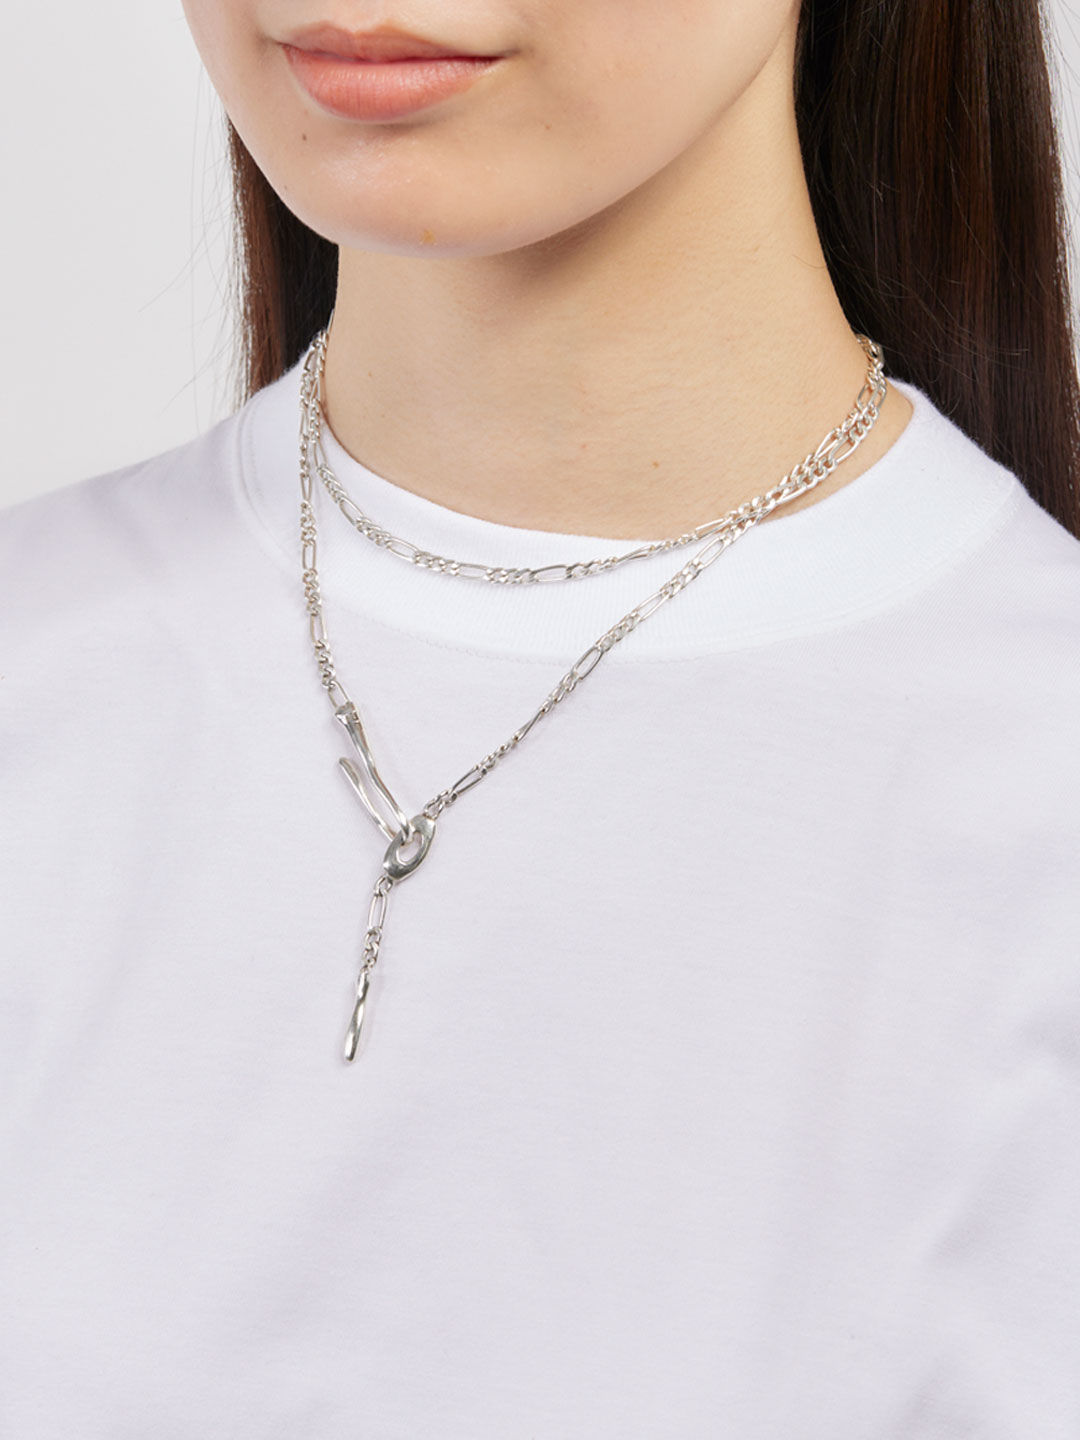 Figarito Necklace/Belly Chain - Silver